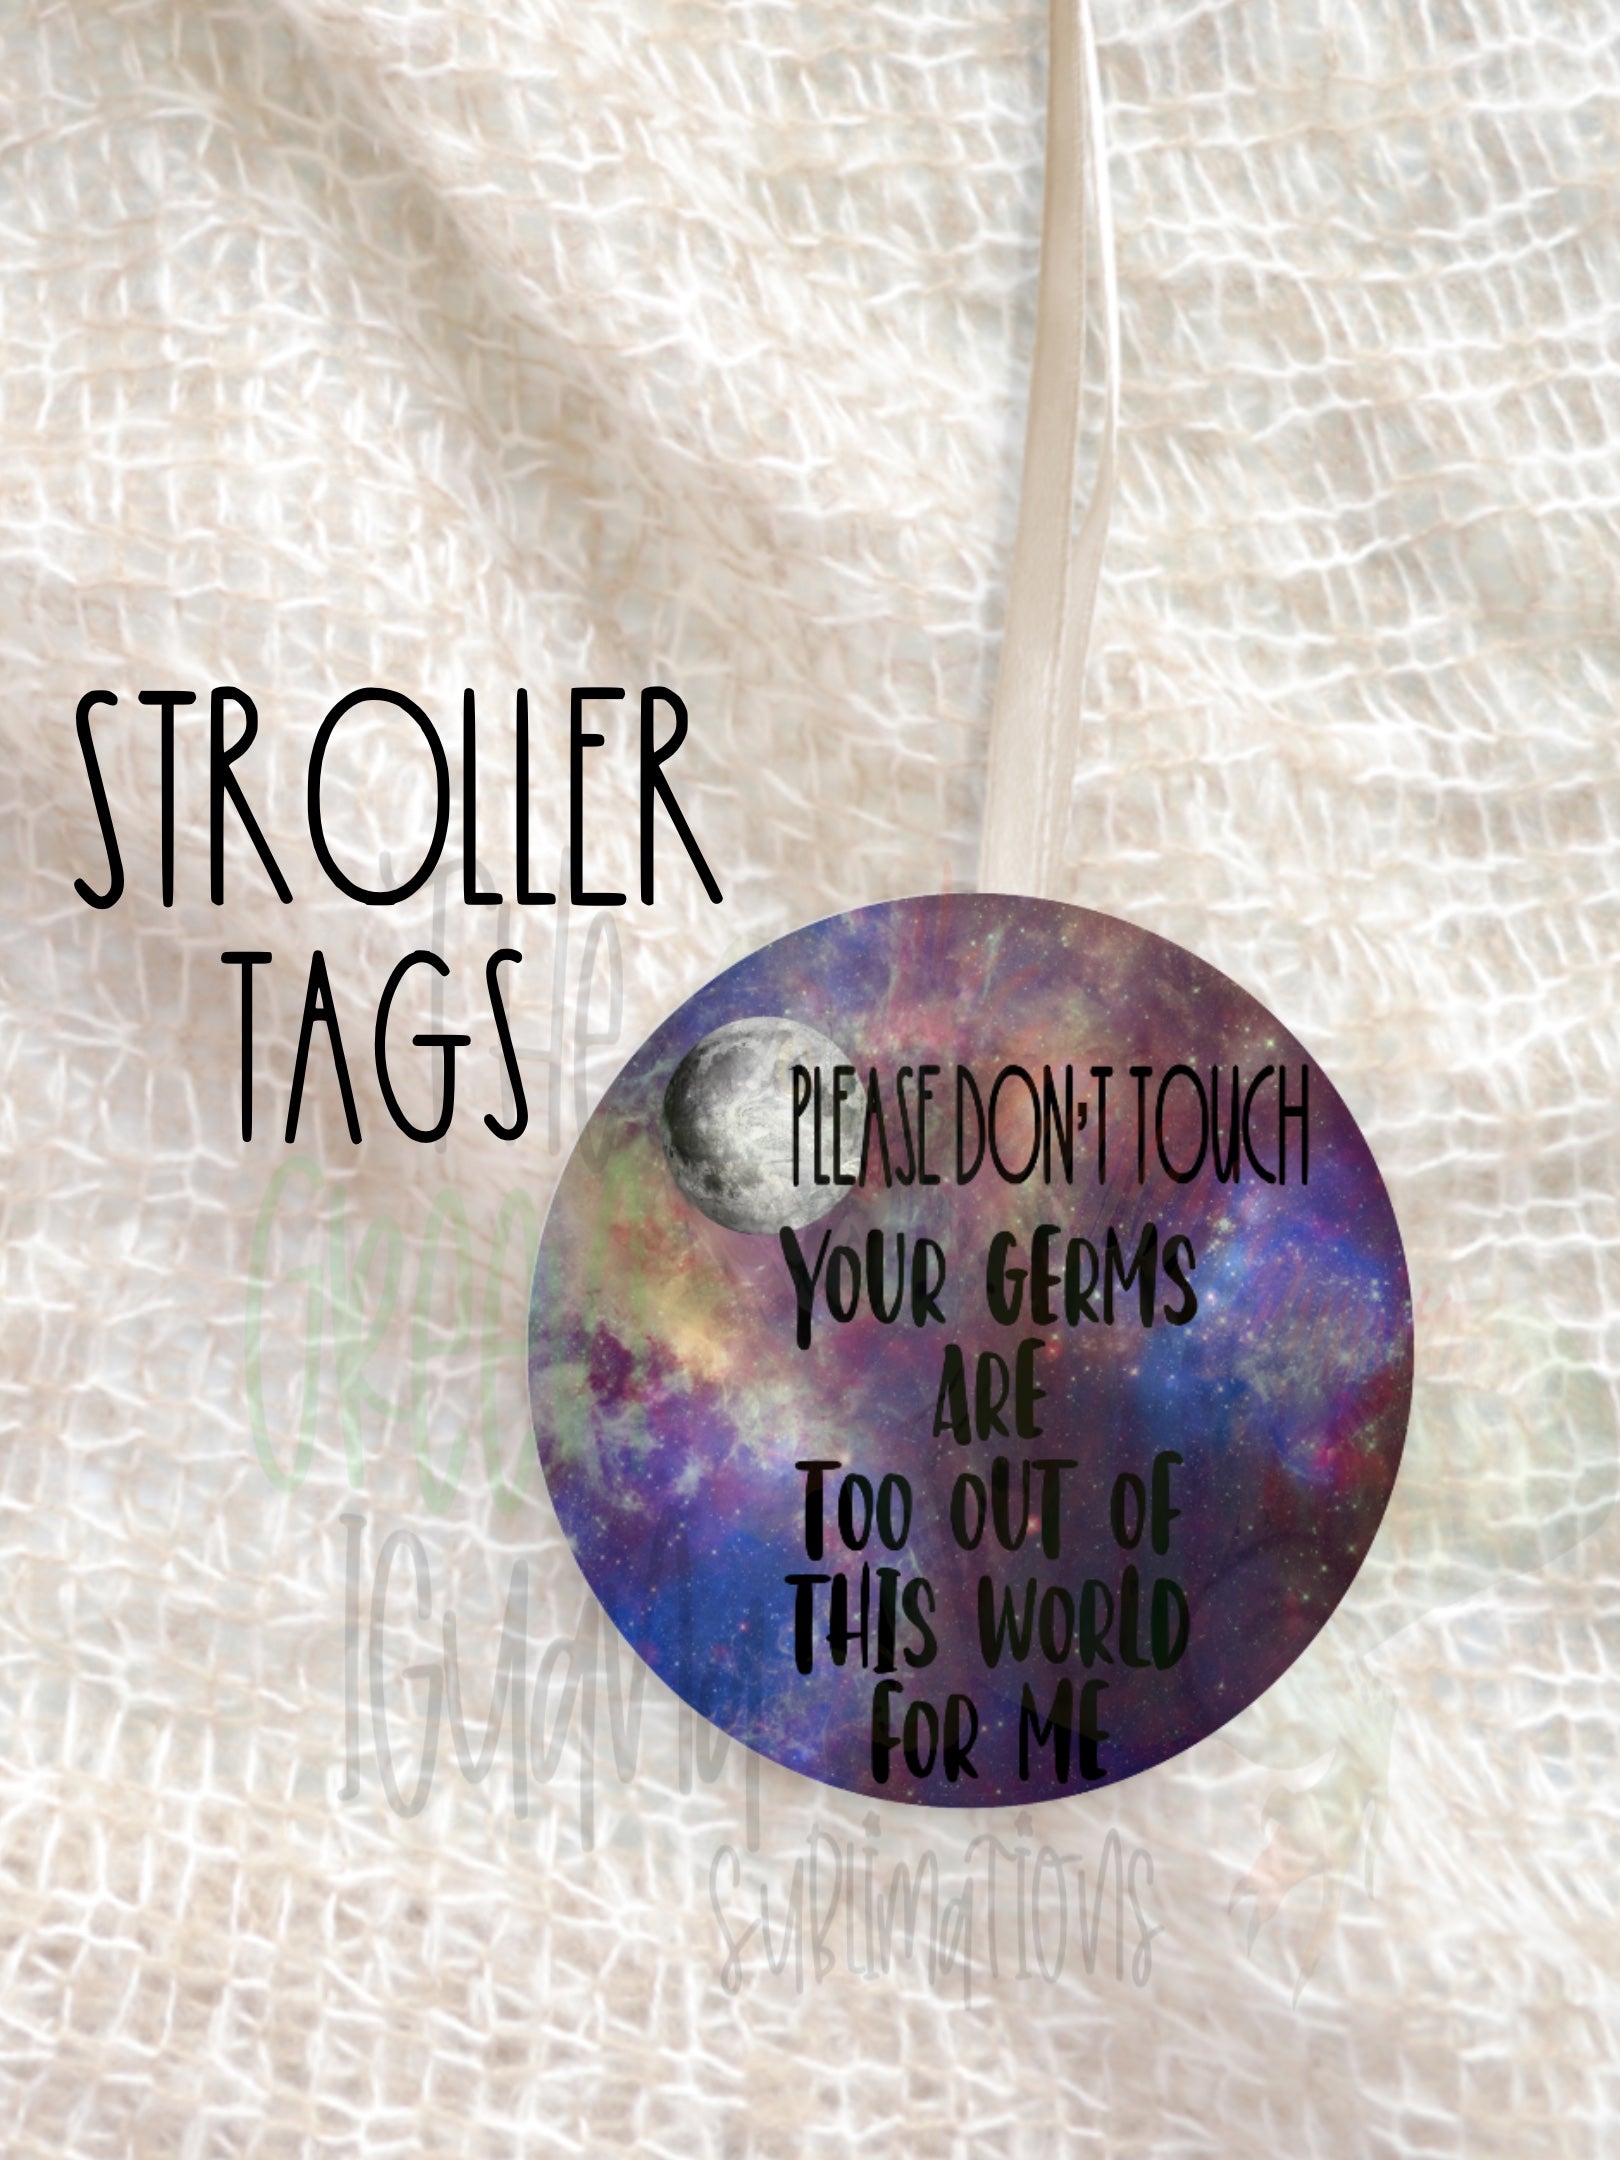 Your germs are too out of this world for me - Stroller tag